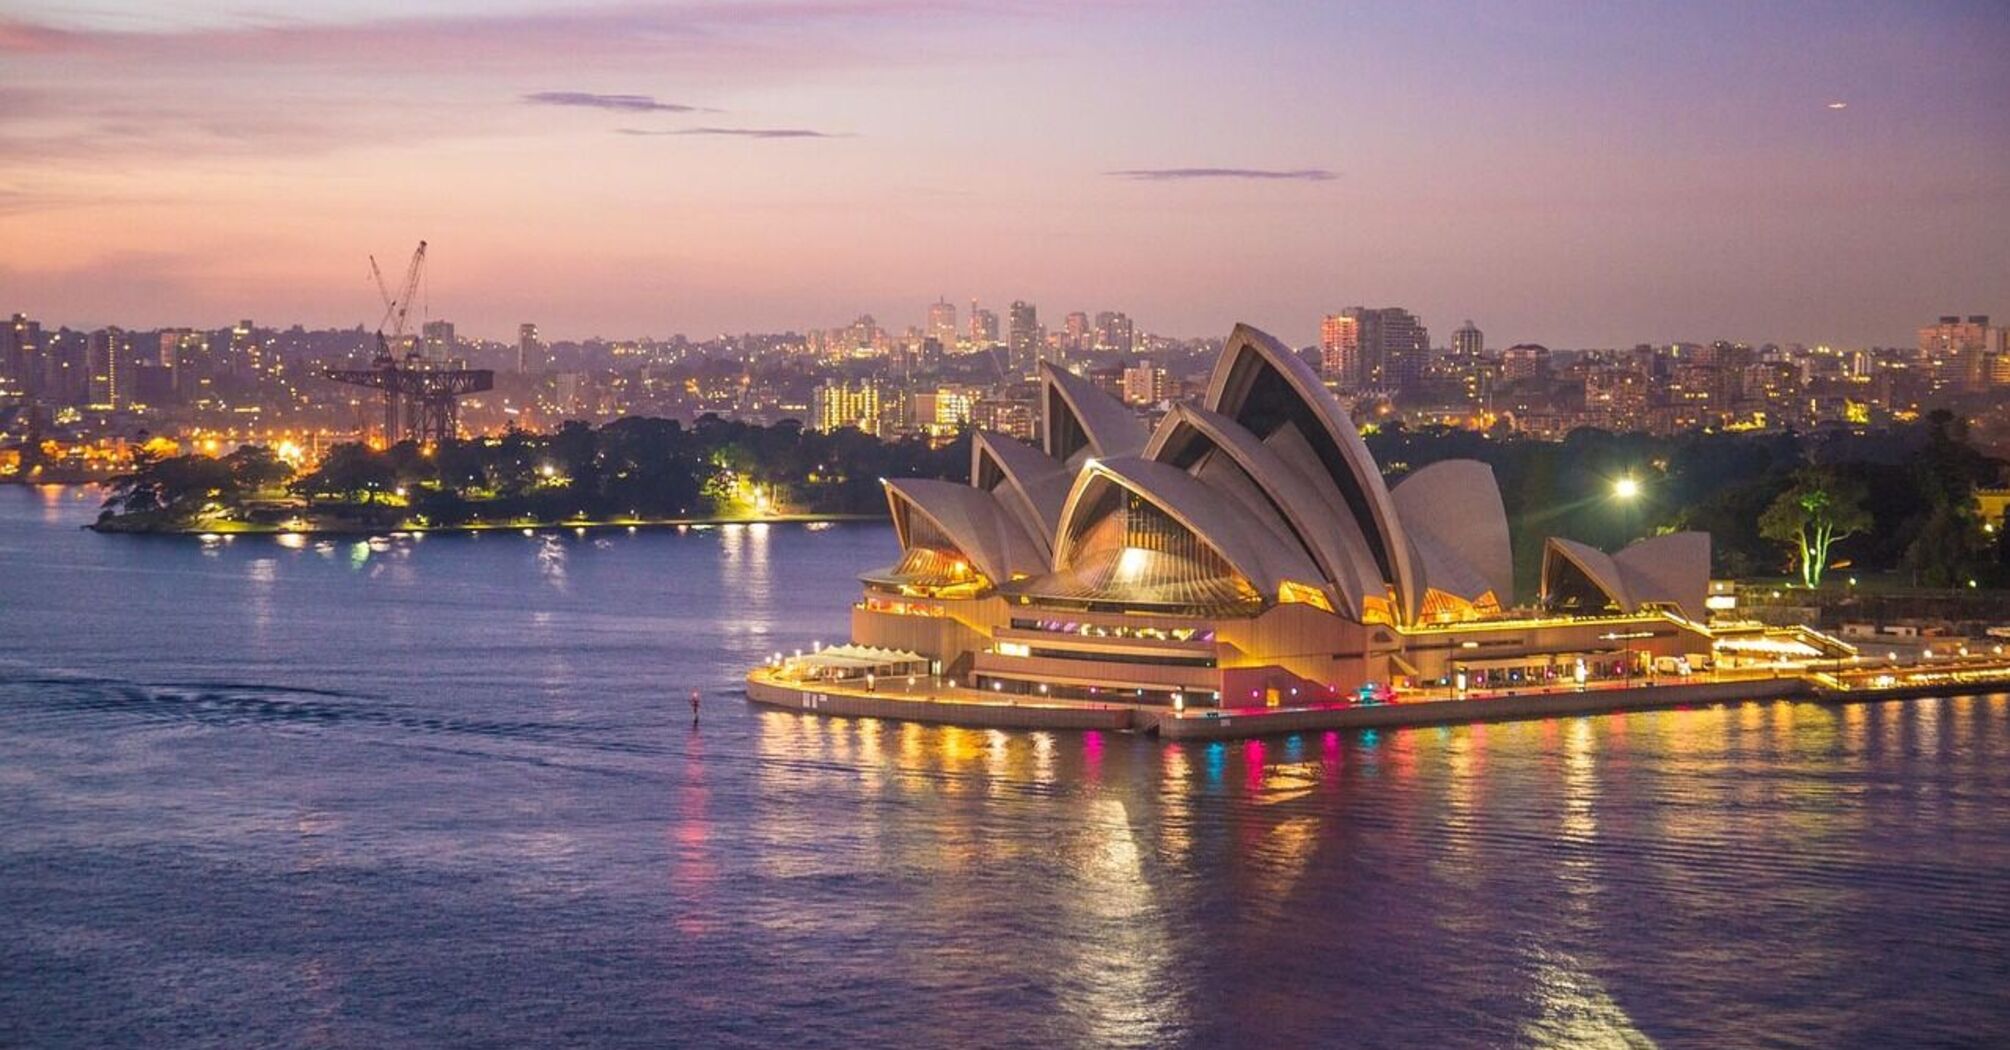 Top 10 places worth seeing in Sydney